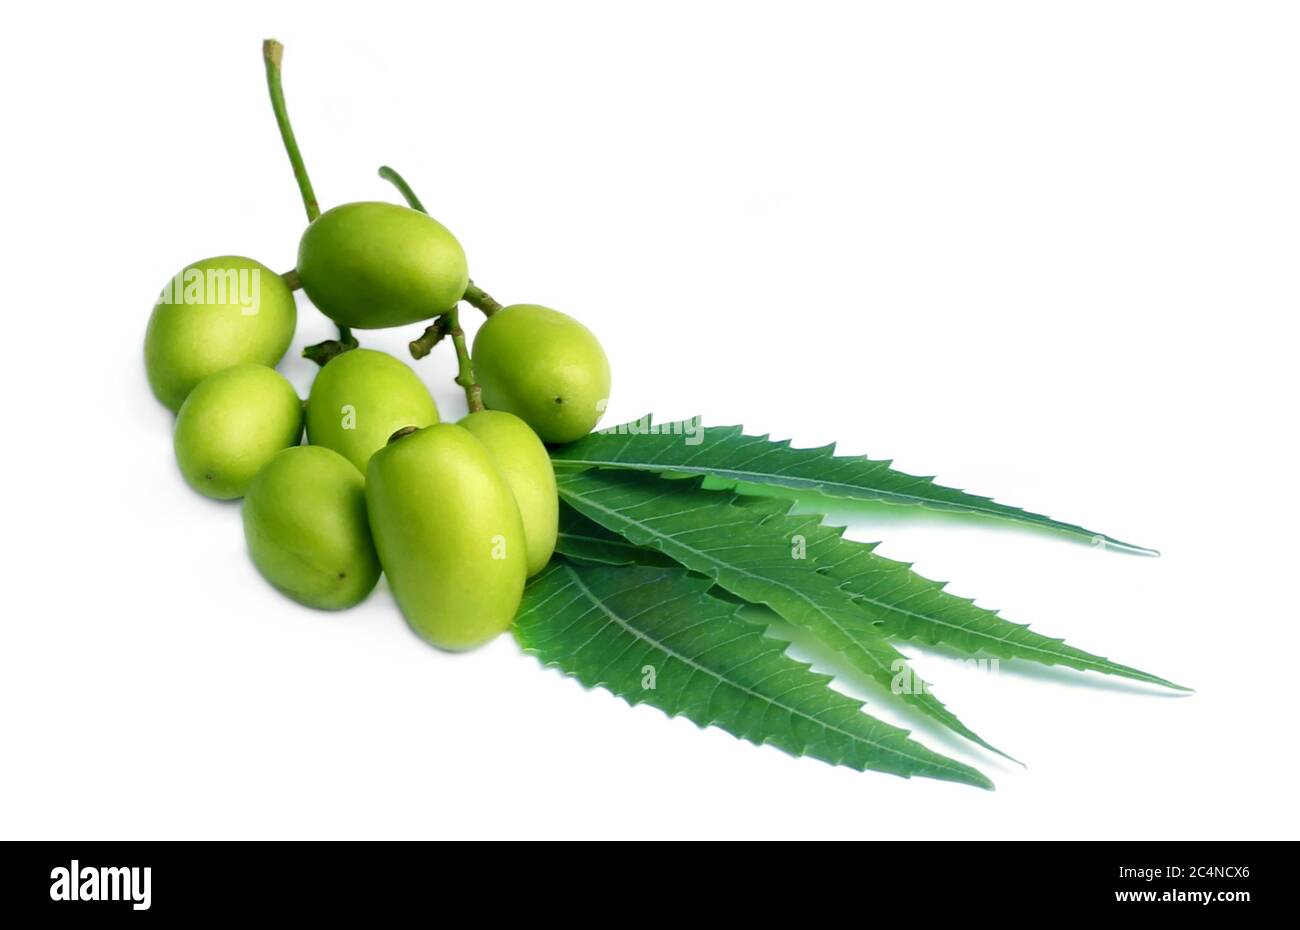 Medicinal neem leaves with fruit over white Background Stock Photo